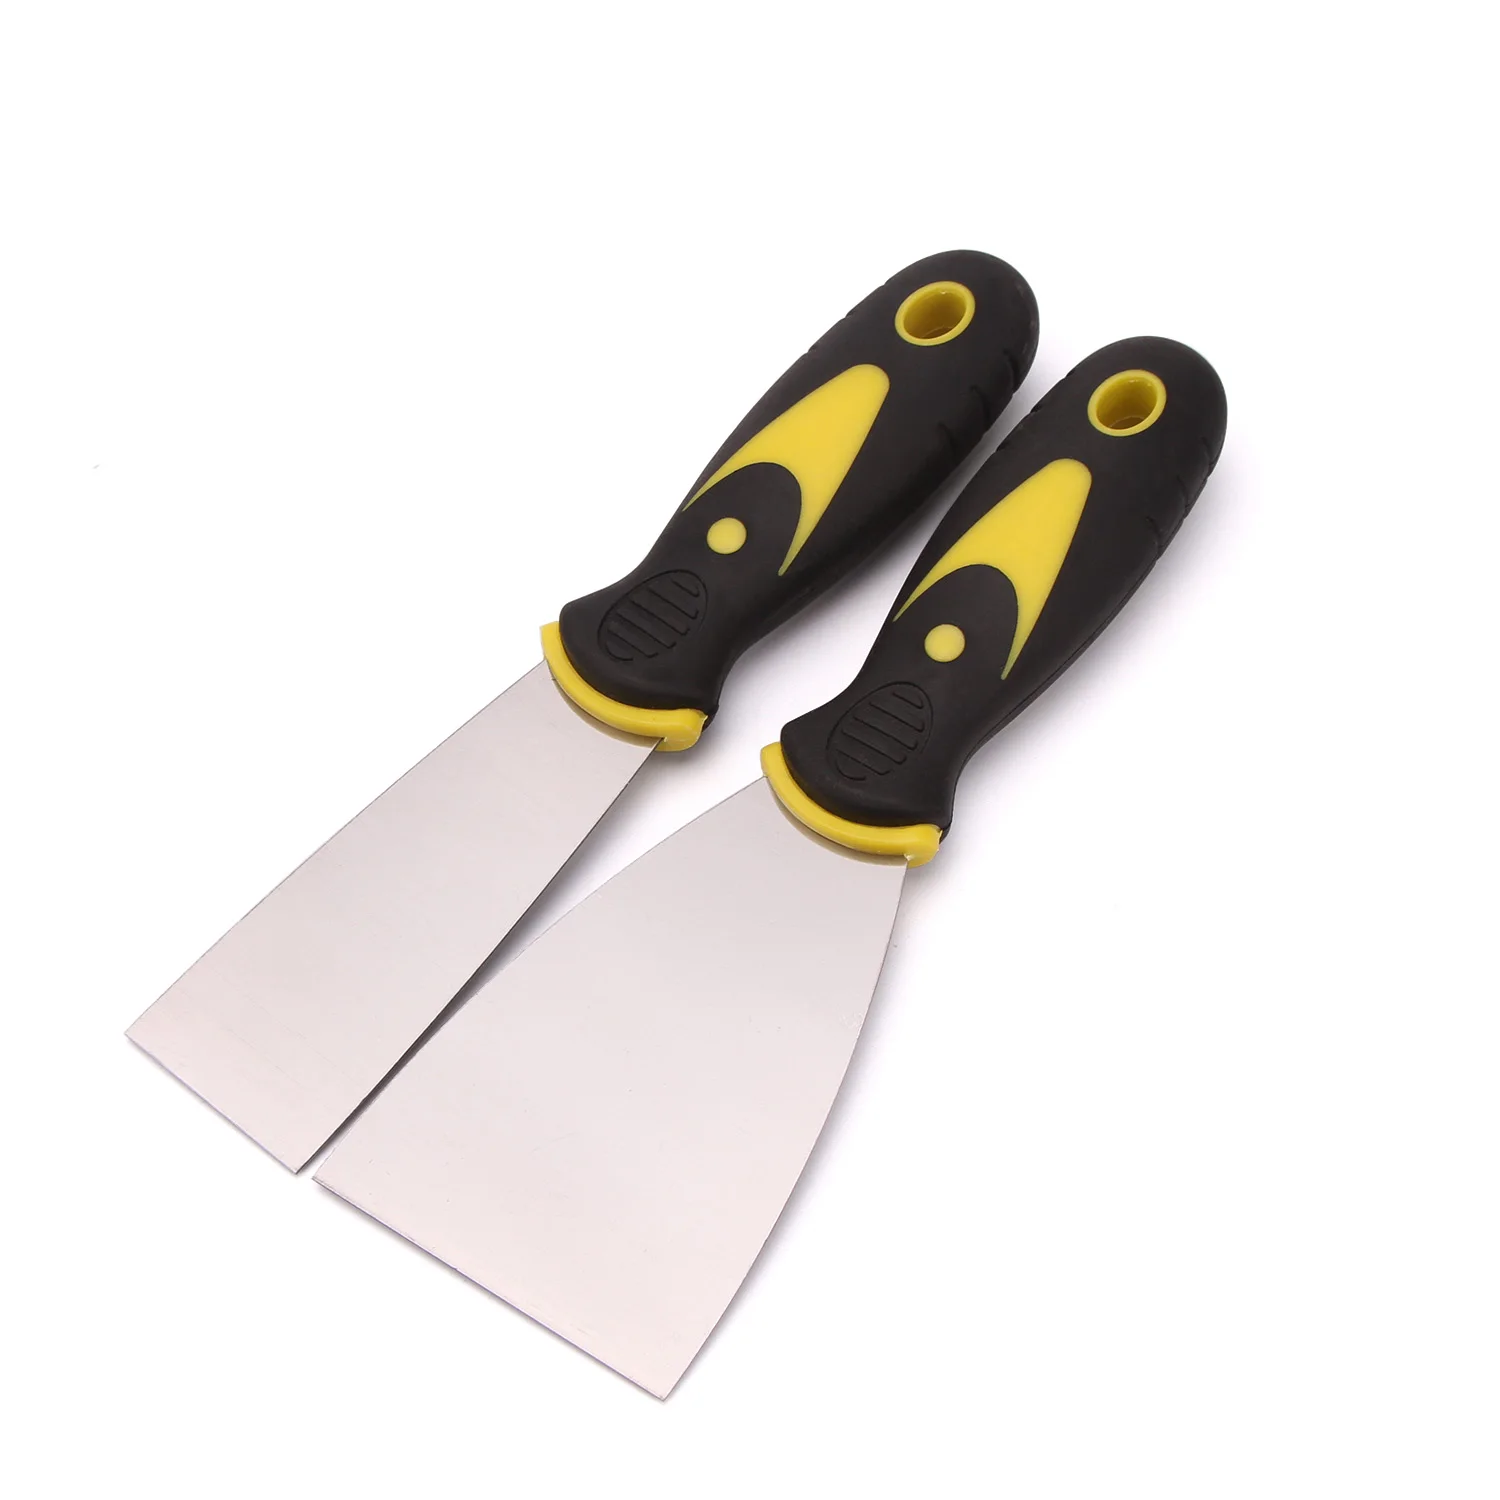 Professional Scraper Putty Knife Spatulas with Yellow Plastic ABS Handle (1600473869432)